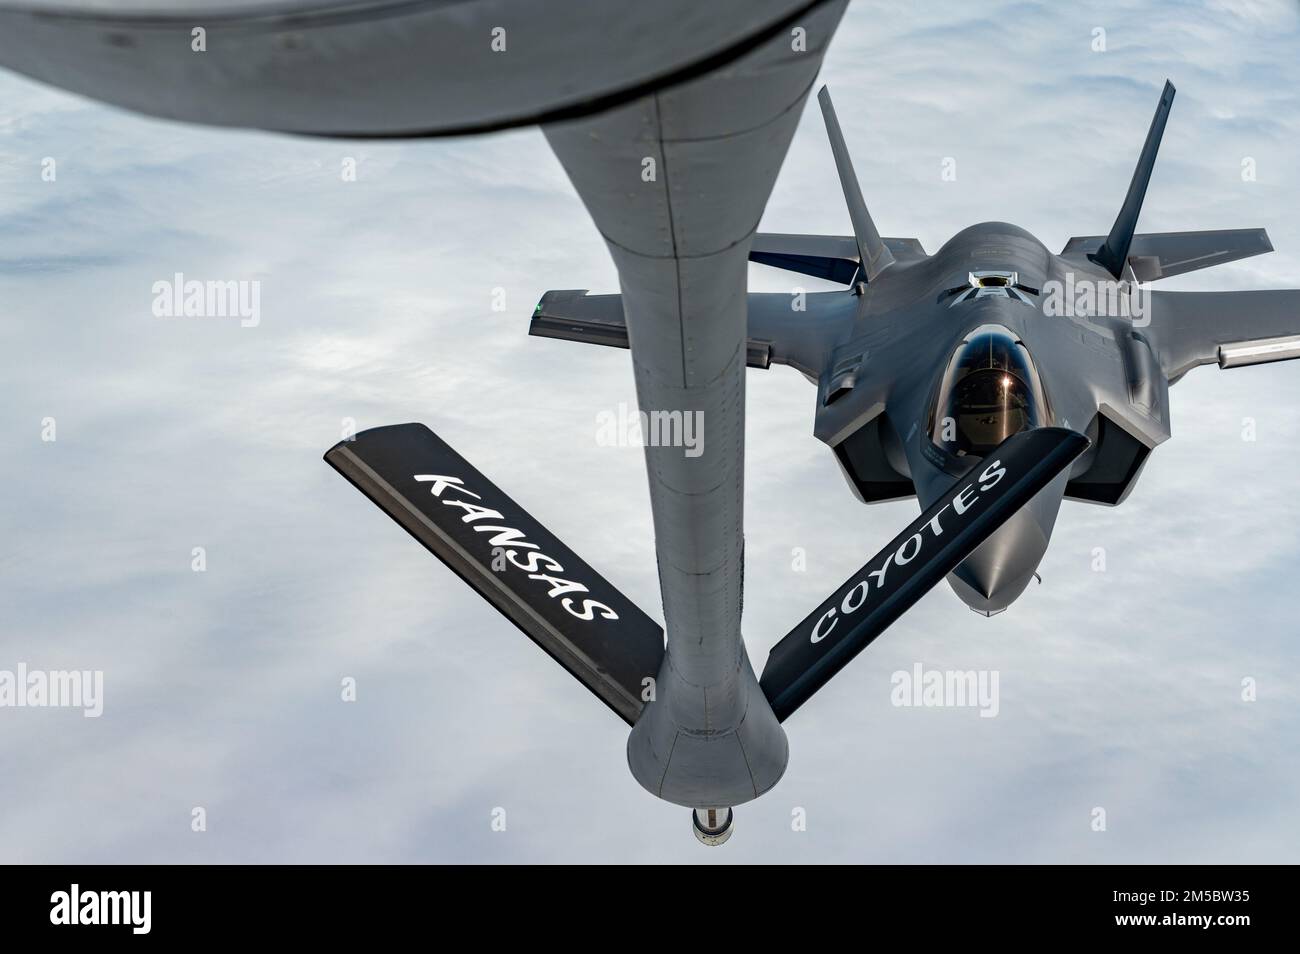 An F-35A Lightning II from the 354th Fighter Wing, Eielson Air Force Base, Alaska, approaches a KC-135 Stratotanker assigned to the 117th Air Refueling Squadron, Forbes Field Air National Guard Base, Topeka, Kansas, over the Indo-Pacific theater, Feb. 24, 2022. The F-35As are currently deployed to Kadena Air Base, Japan, conducting integrated operations with joint partners and allies to ensure a free and open Indo-Pacific region. Stock Photo